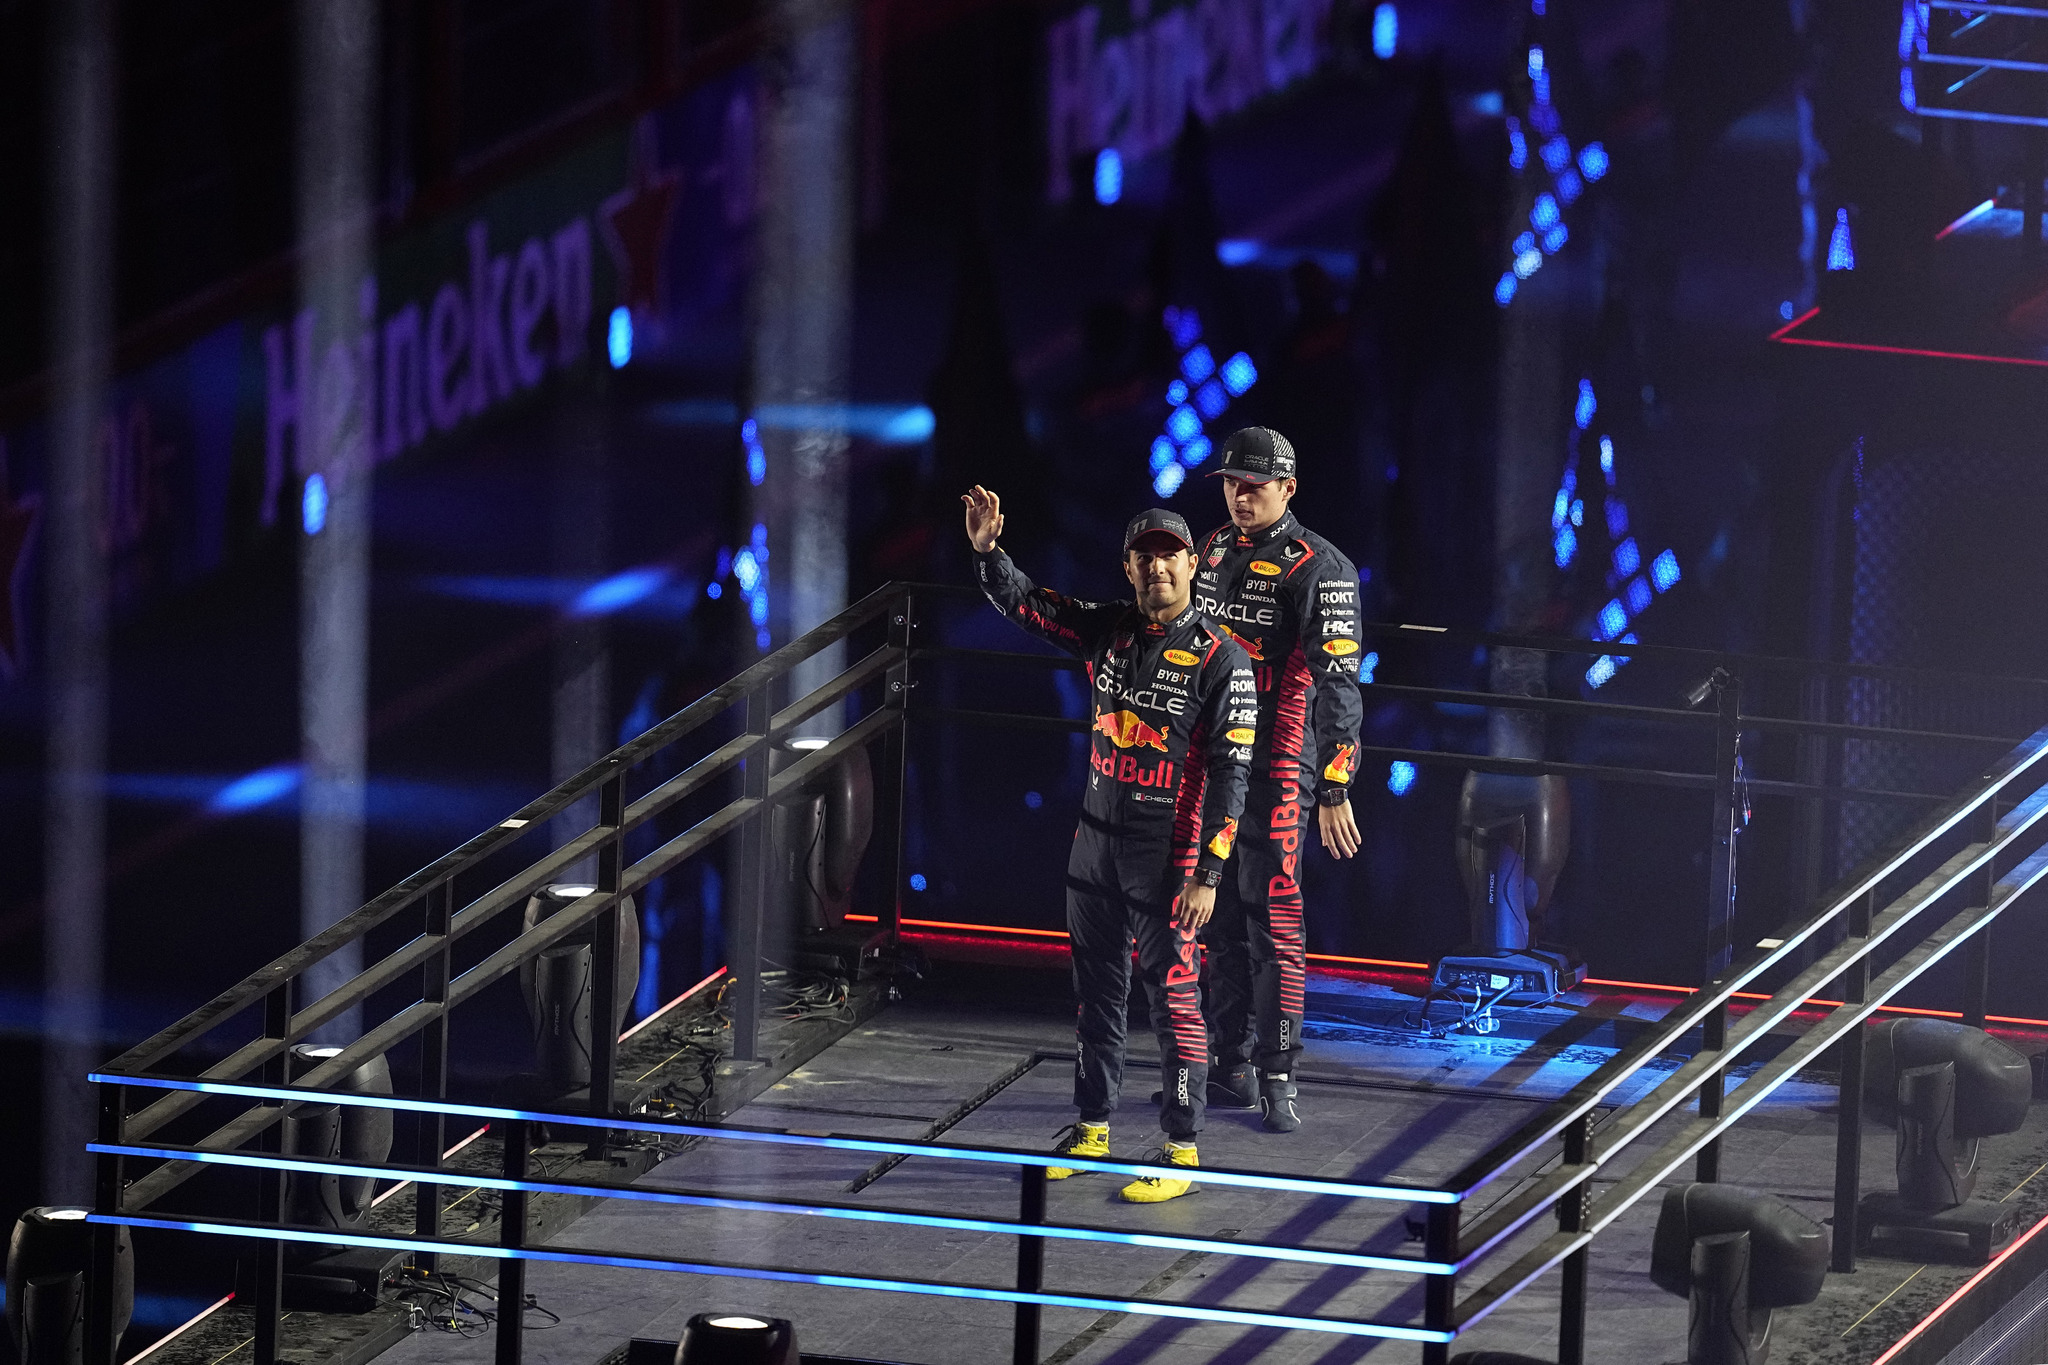 Checo Perez and Red Bull at Las Vegas' opening night on Wednesday.